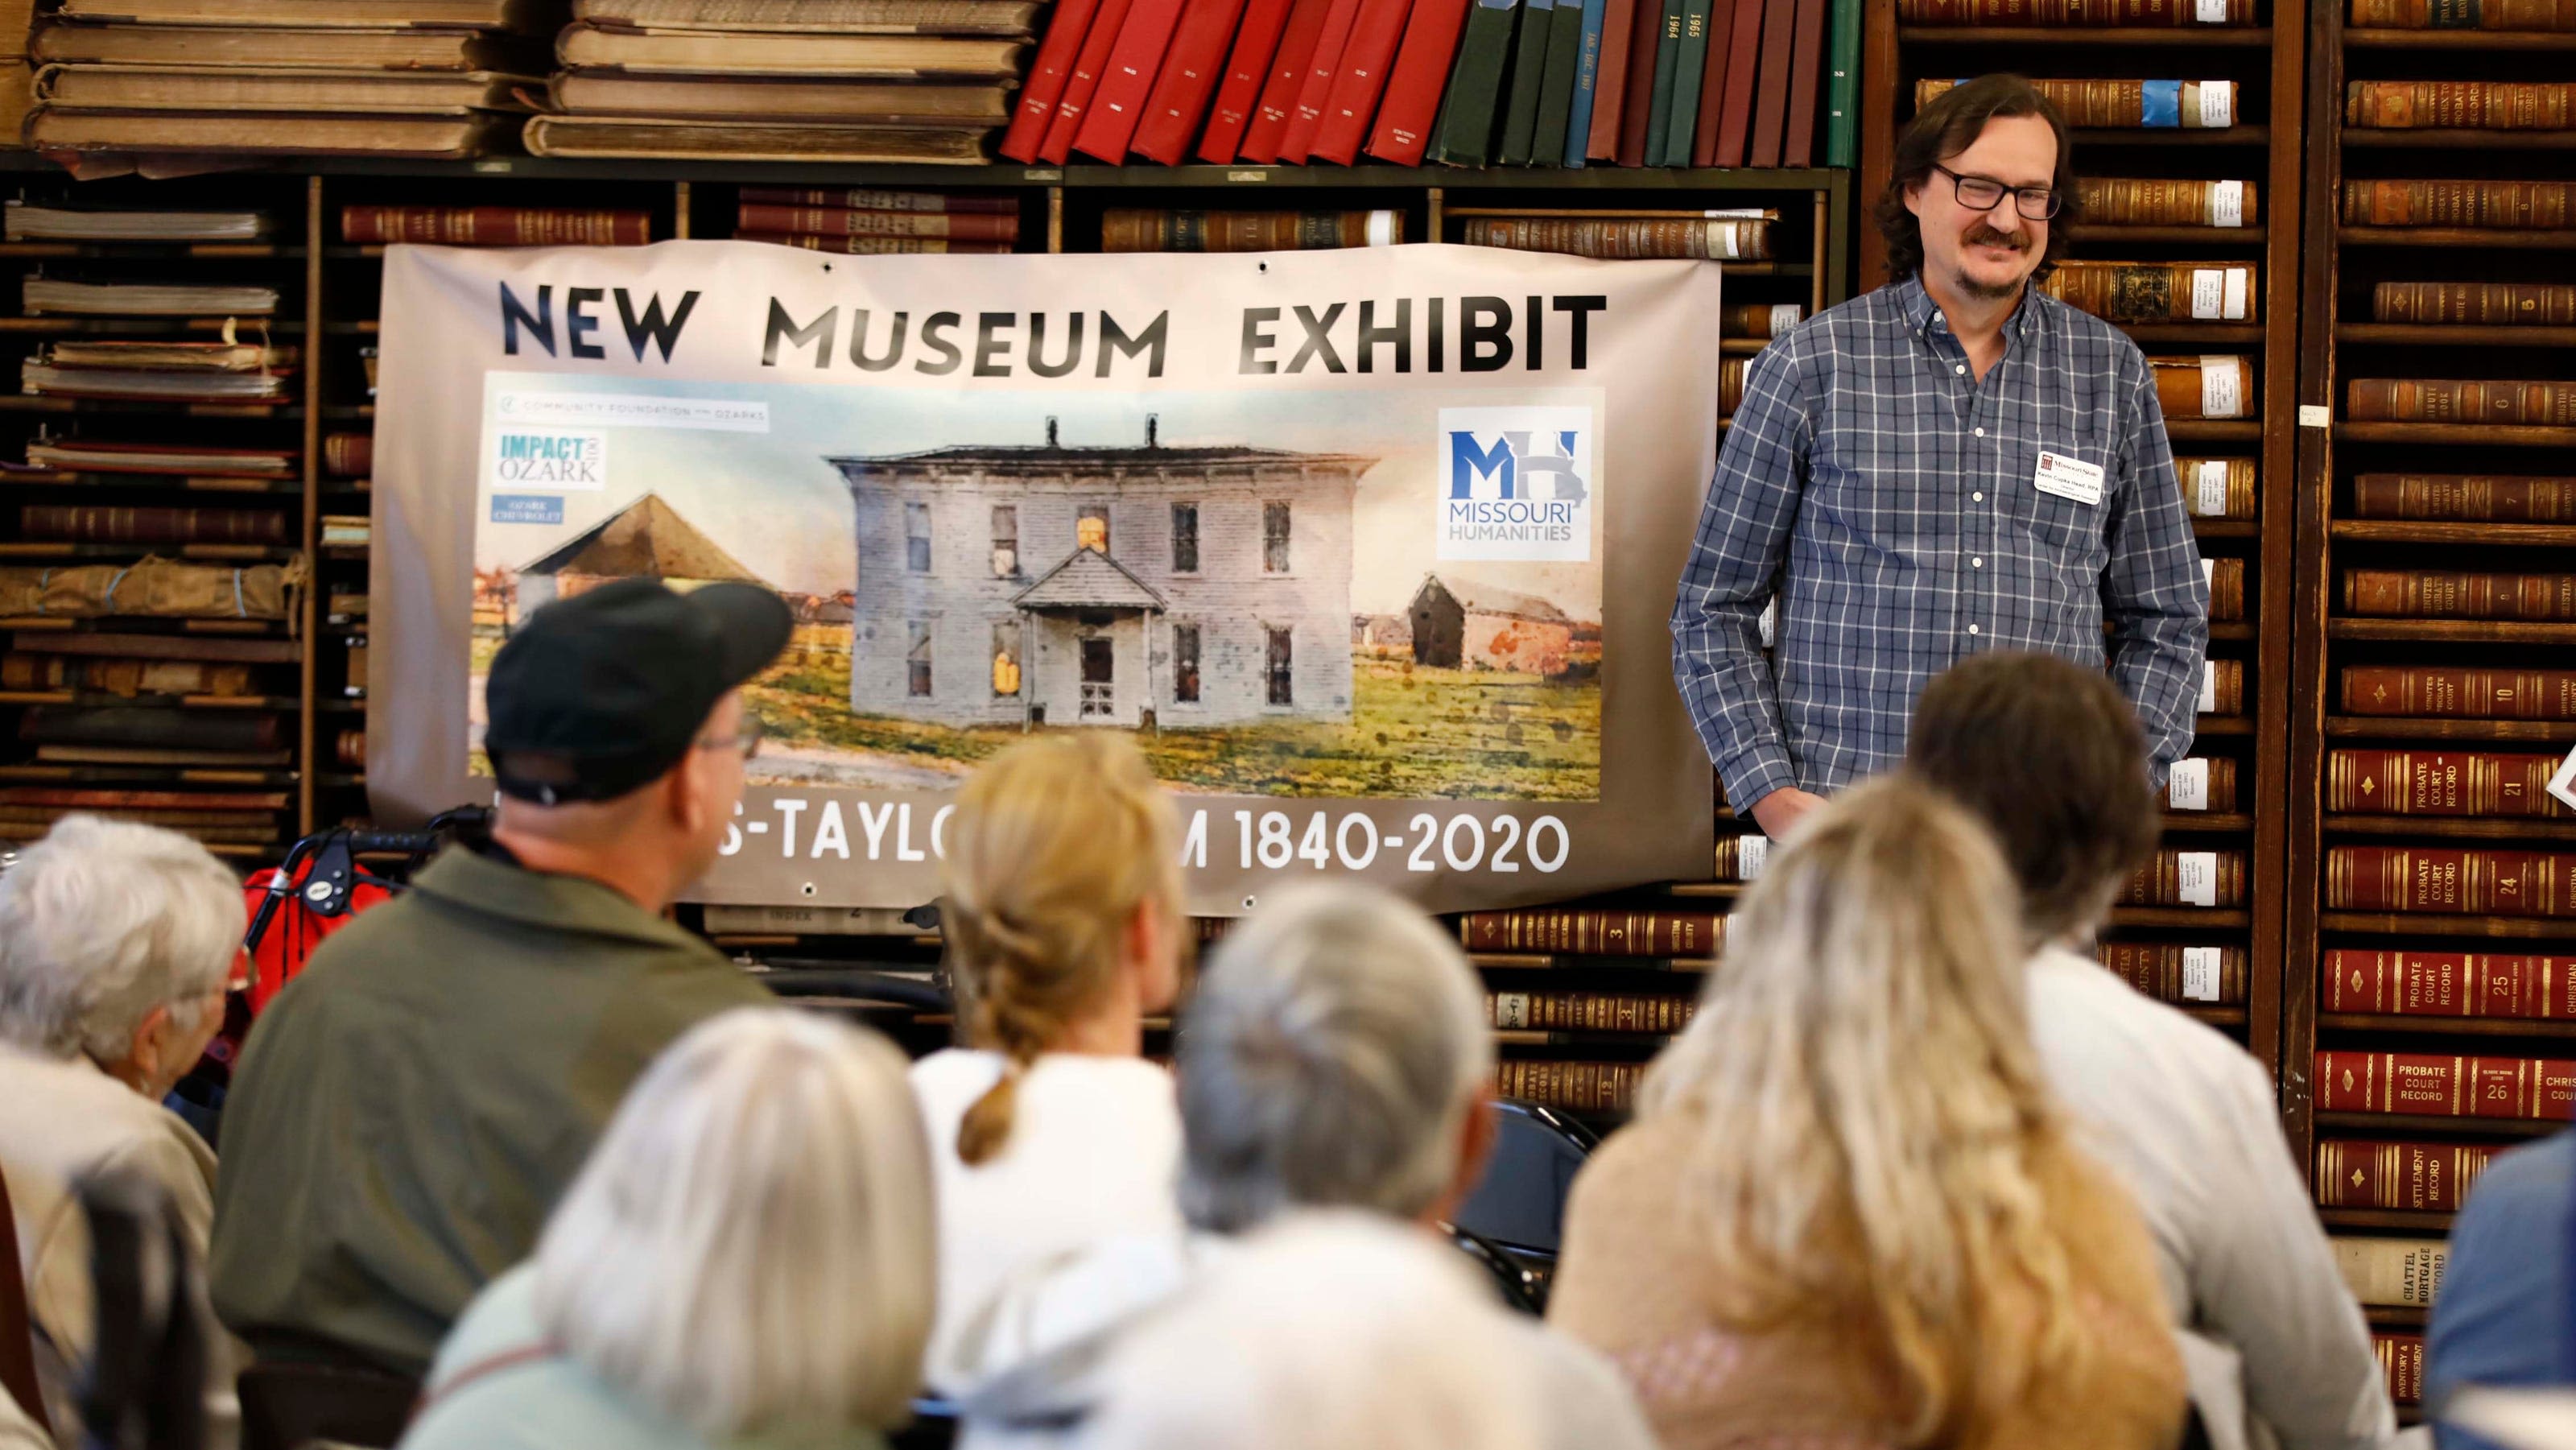 Experts worked quickly to save artifacts from former Ozark farm. Now history is on display